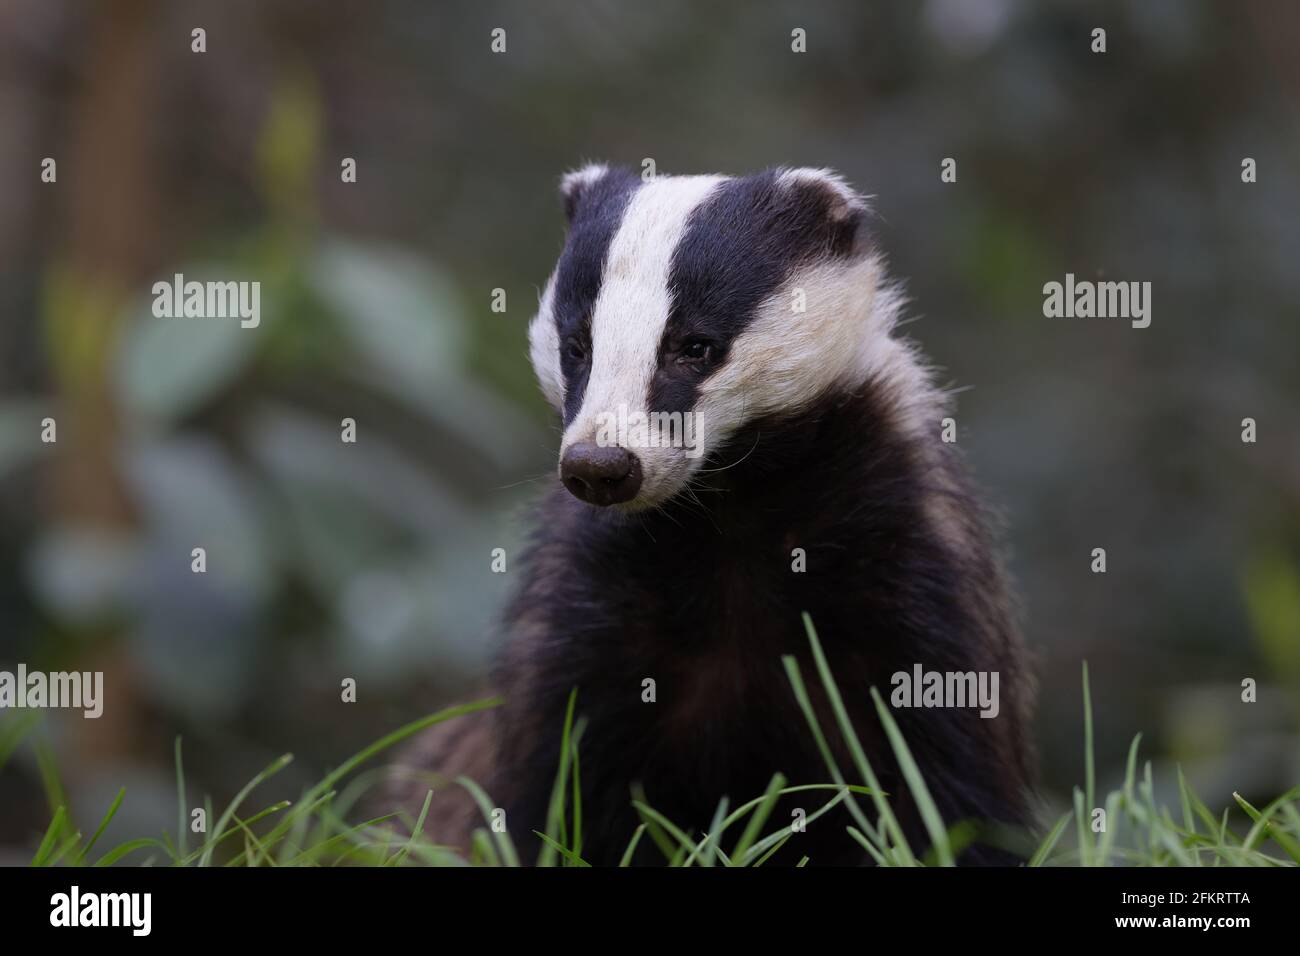 The European badger, also known as the Eurasian badger, is a badger species in the family Mustelidae native to almost all of Europe. Stock Photo